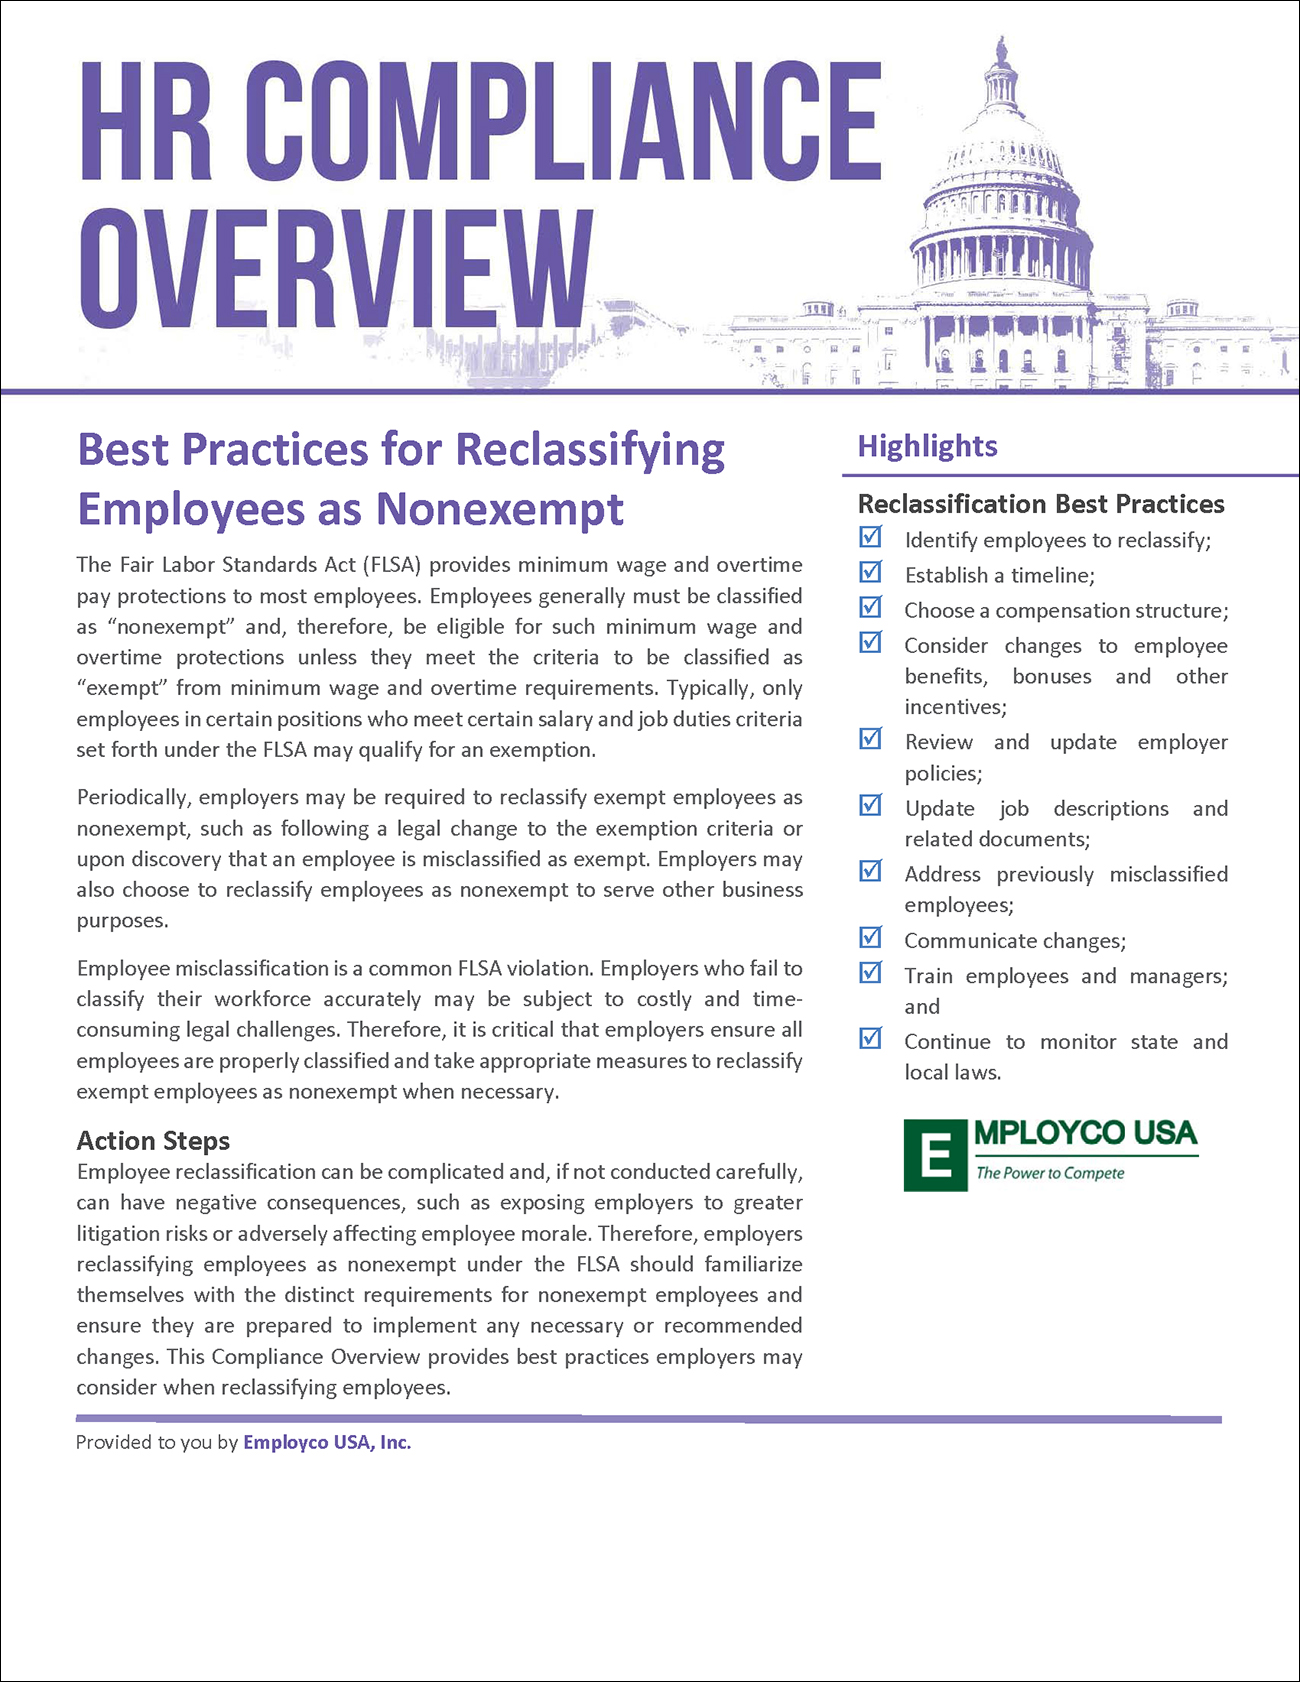 HR Compliance Bulletin: Best Practices for Reclassifying Employees as Non-exempt